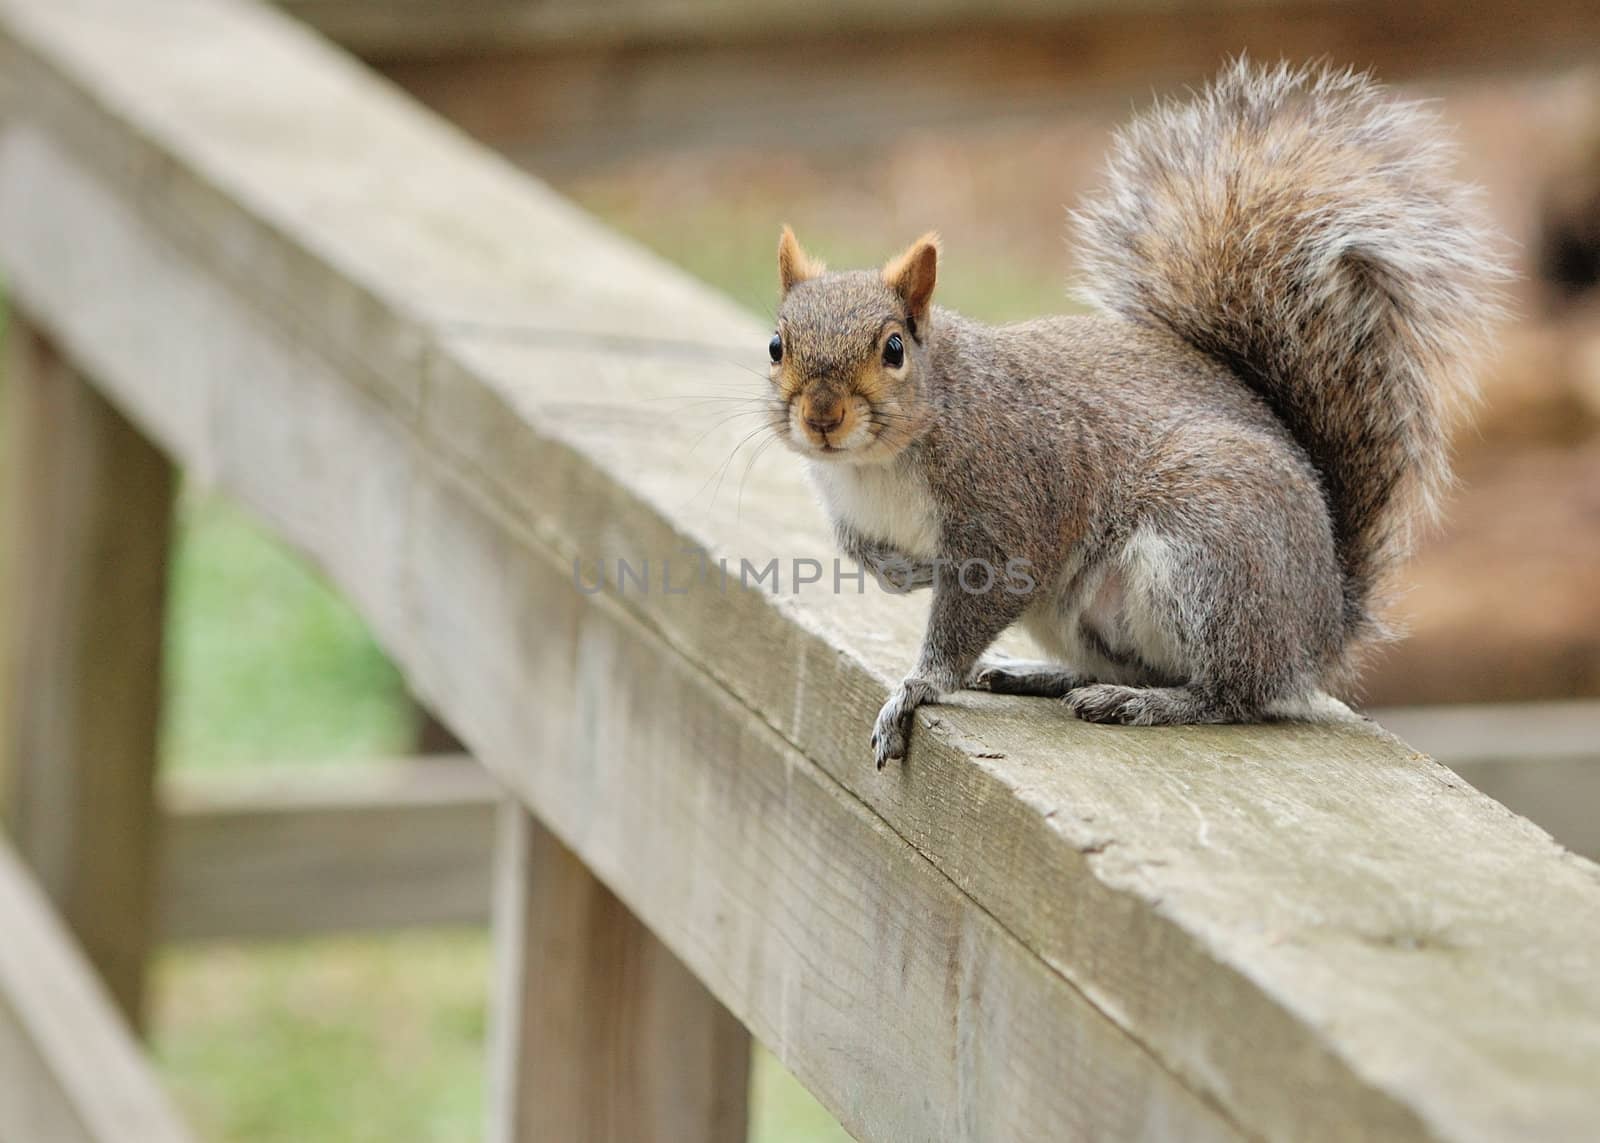 A gray squirrel perched in a fence.